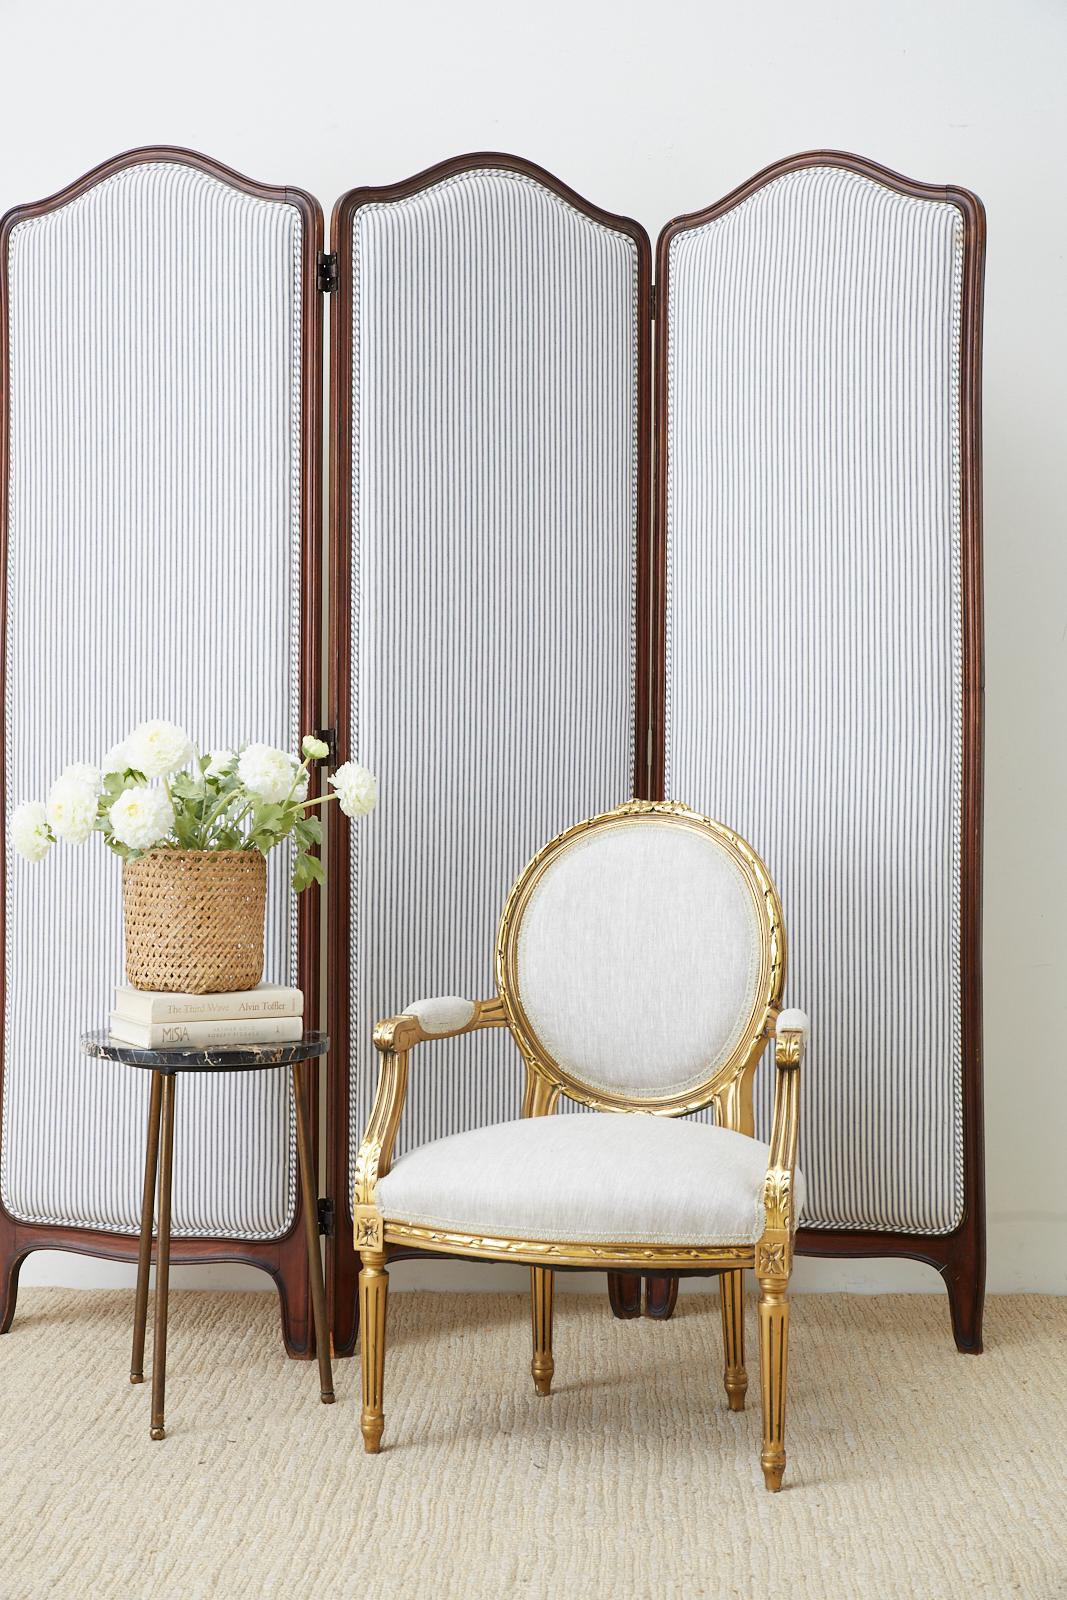 Distinctive 19th century carved walnut three panel folding screen featuring a French ticking stripe upholstery. Made in the French Louis XV taste with a domed crest and shaped feet. The stripe pattern fabric is beautifully laid with a double welt